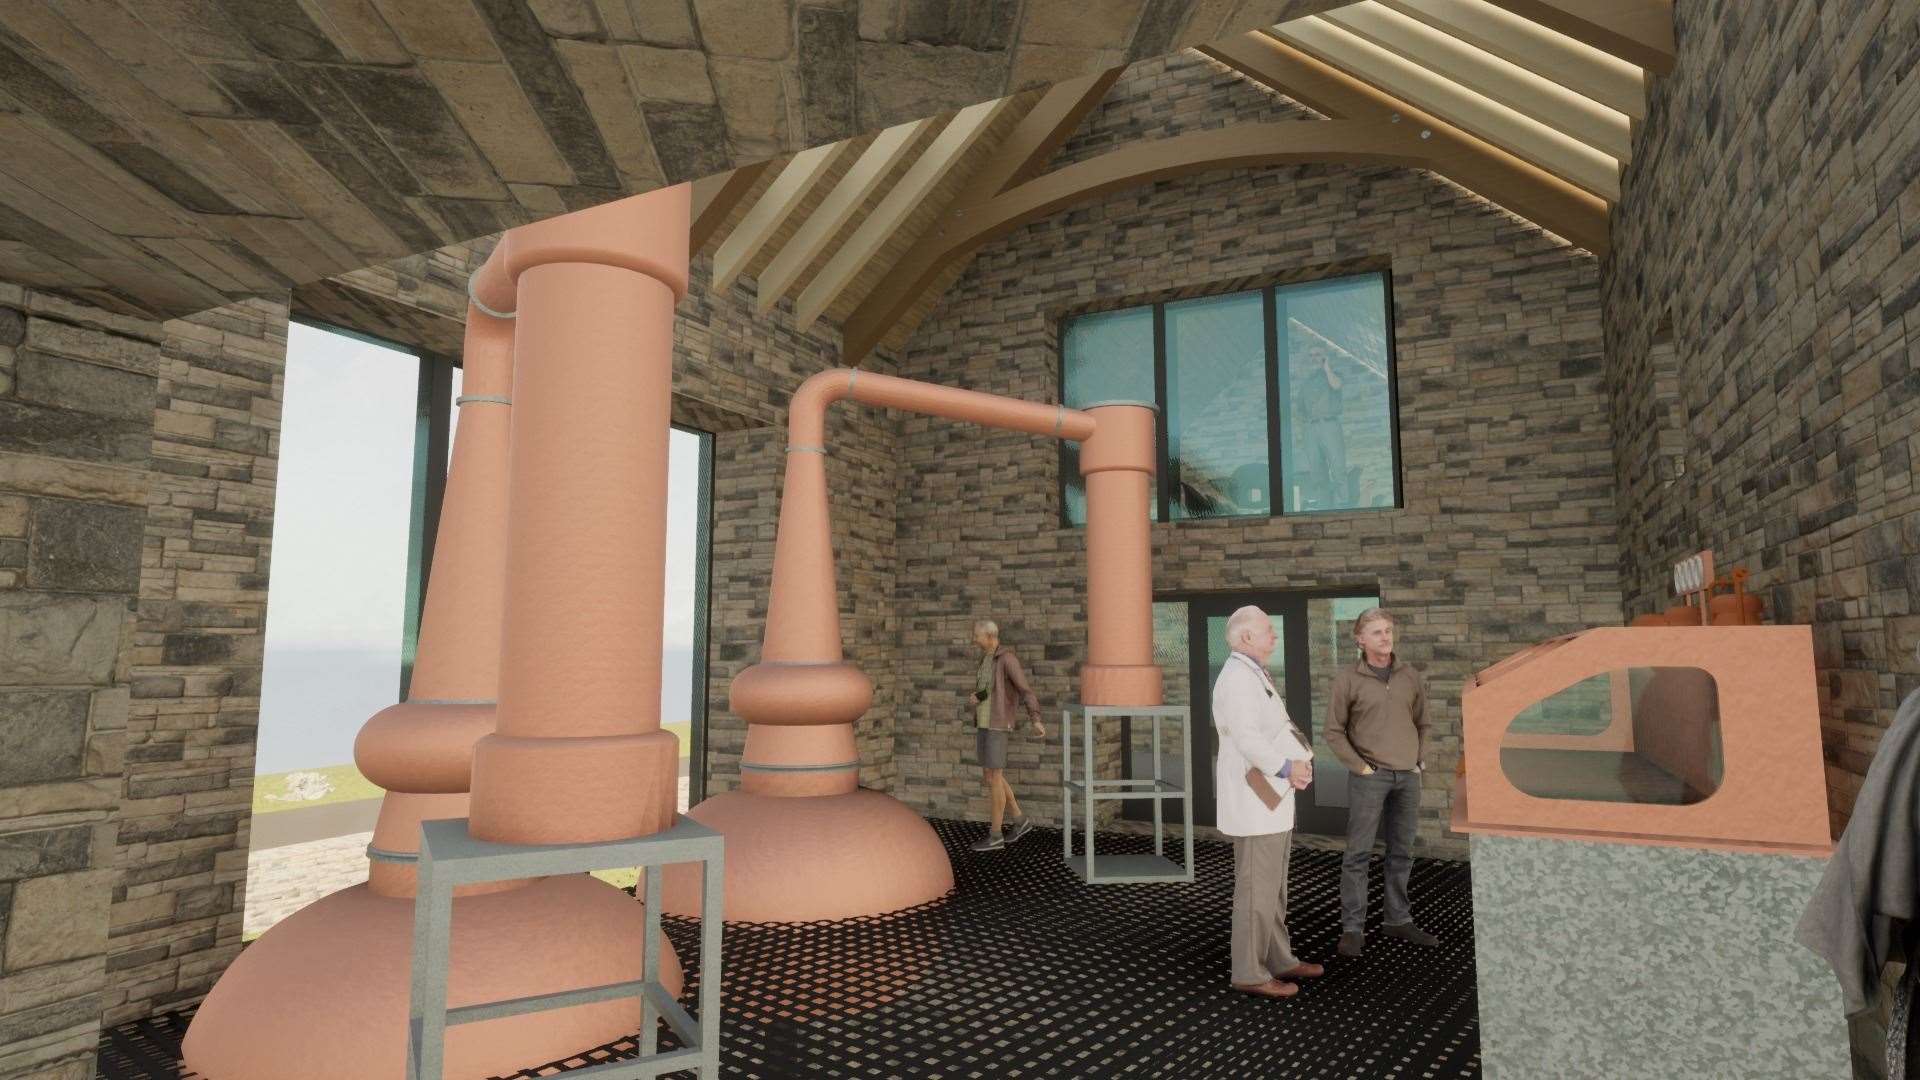 Computer generated image of the whisky stills in the old mill on the outskirts of Castletown.